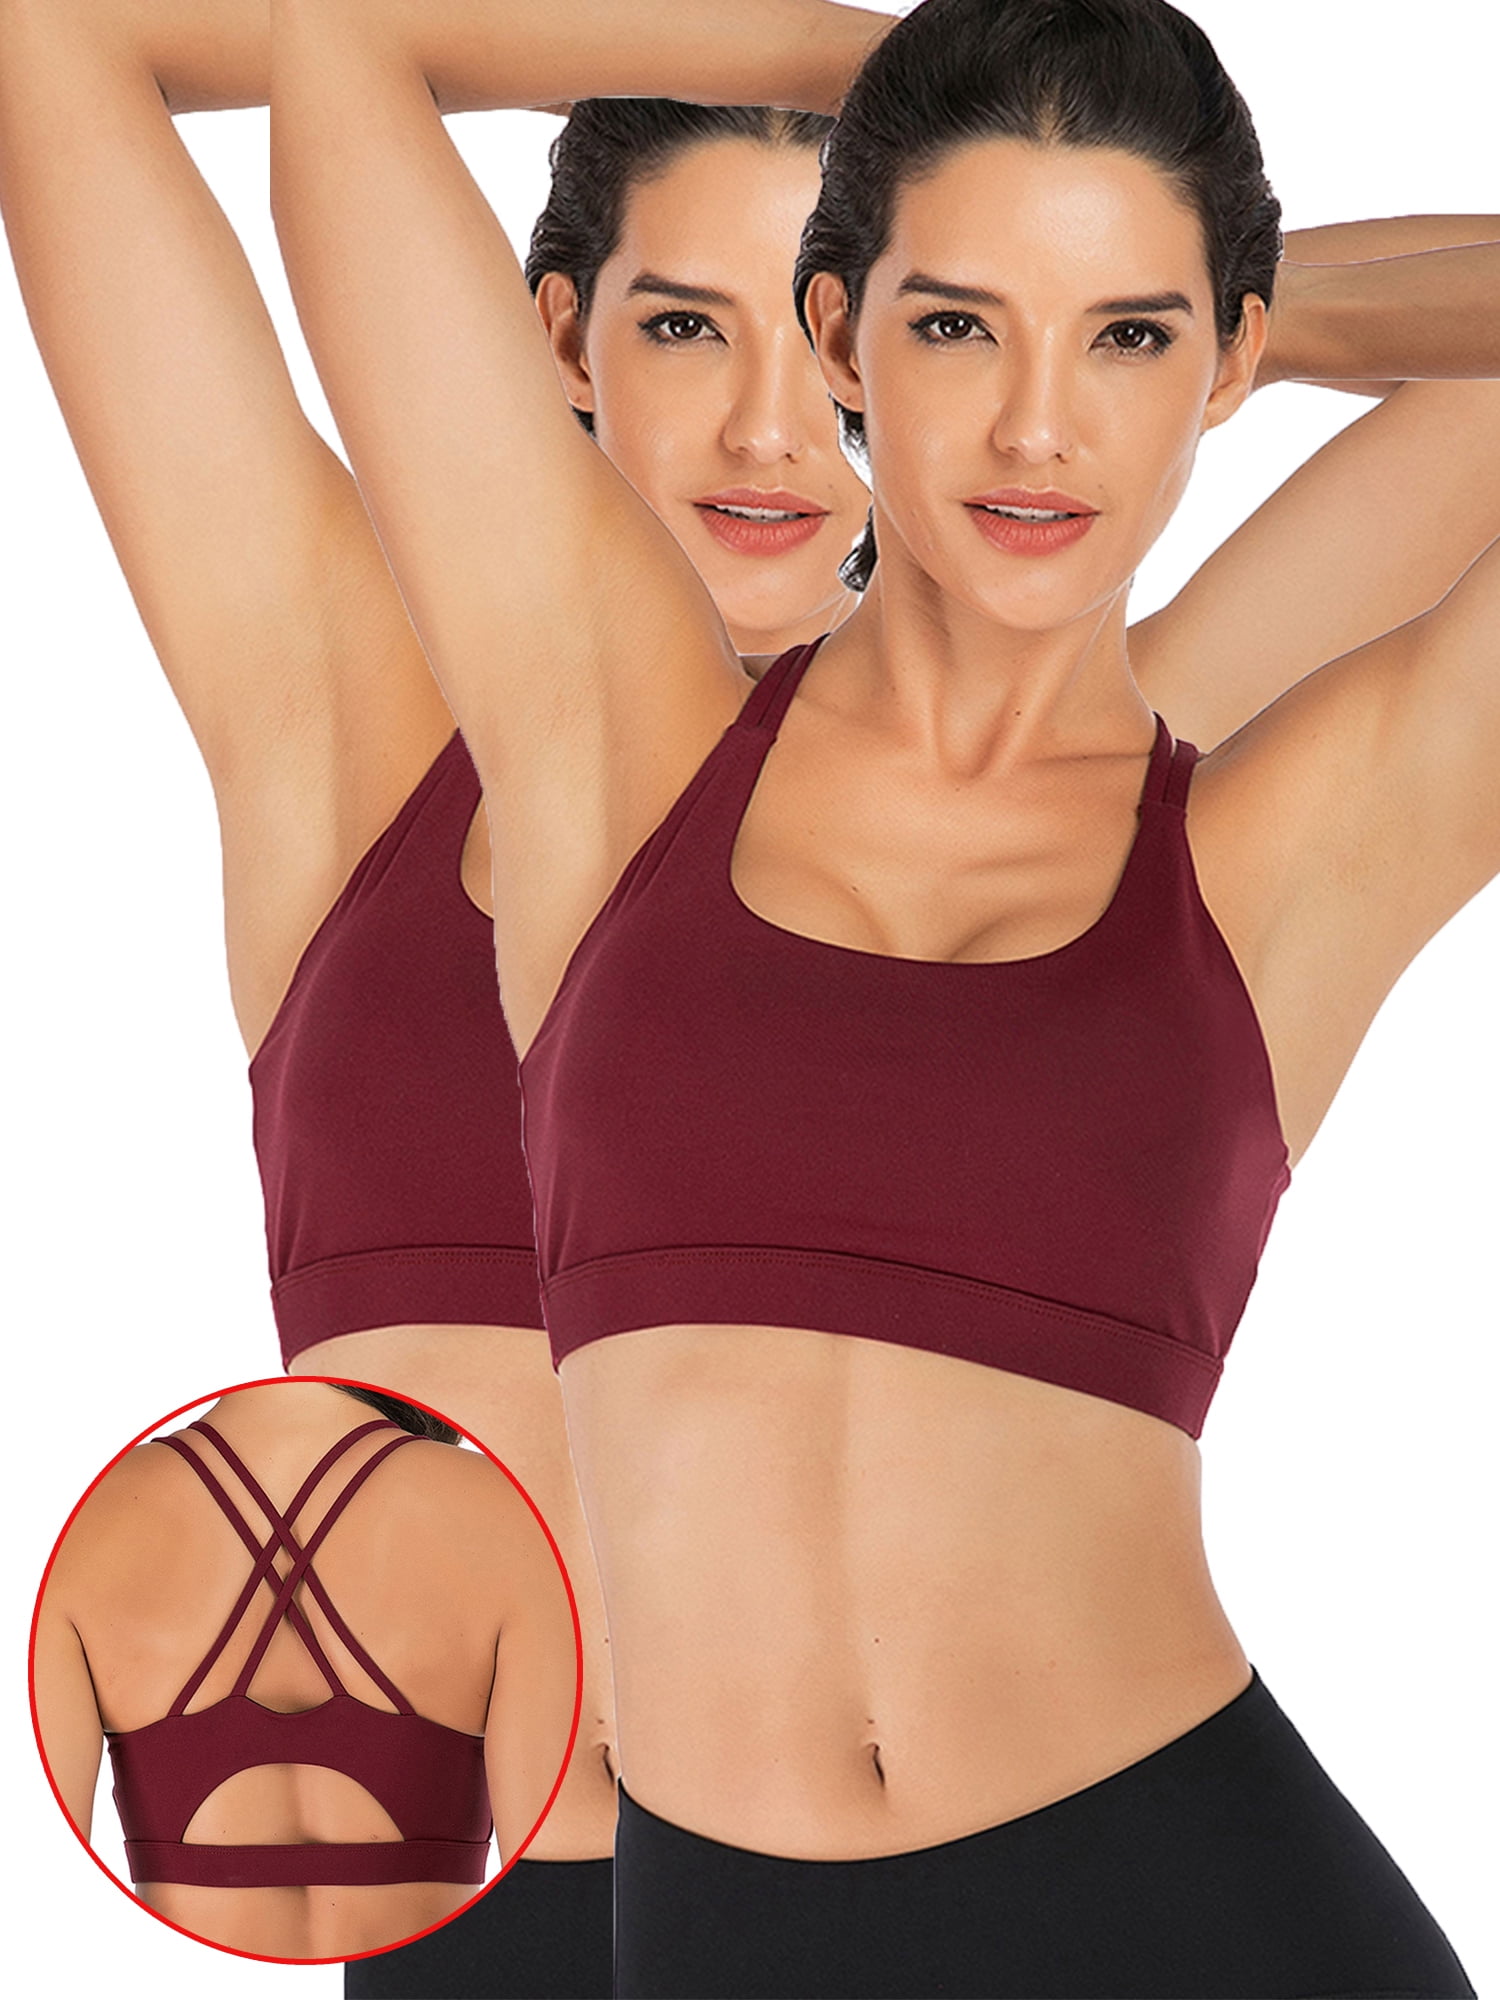 DODOING Women's Racerback Sports Bra Cross Back Strappy Removable Pads Yoga  Running Workout Bra With Good Support 